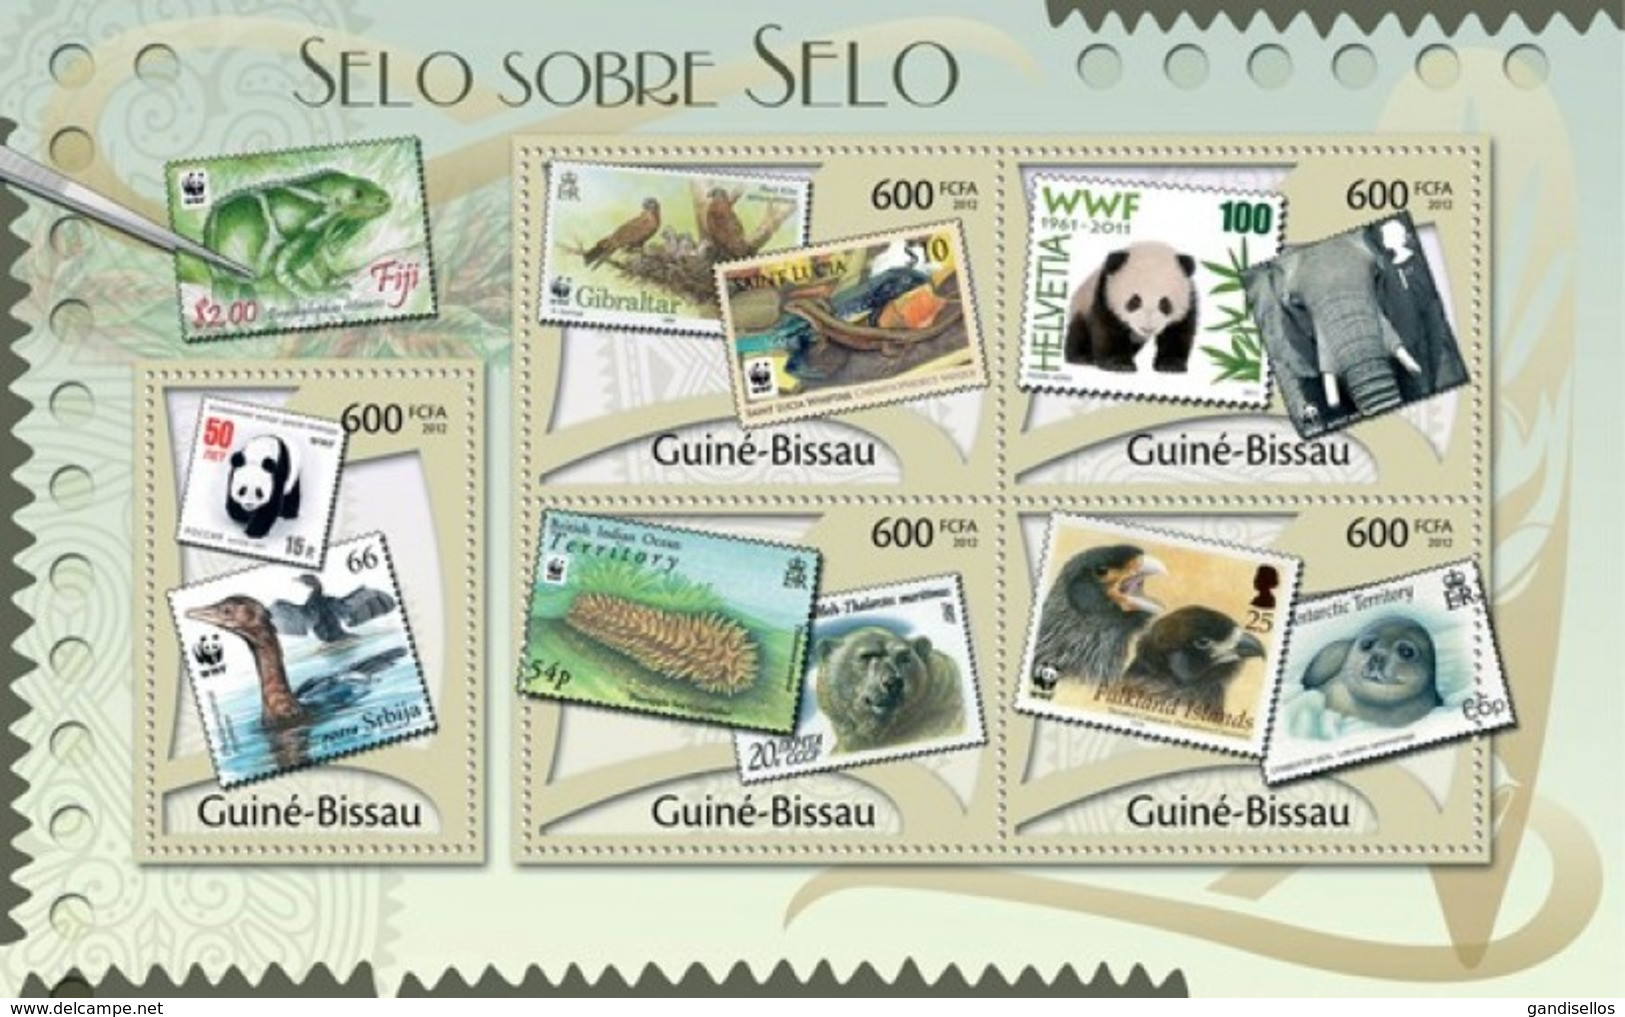 GUINE BISSAU 2012 SHEET STAMPS ON STAMPS TIMBRES SUR TIMBRES Gb12104a - Guinea-Bissau